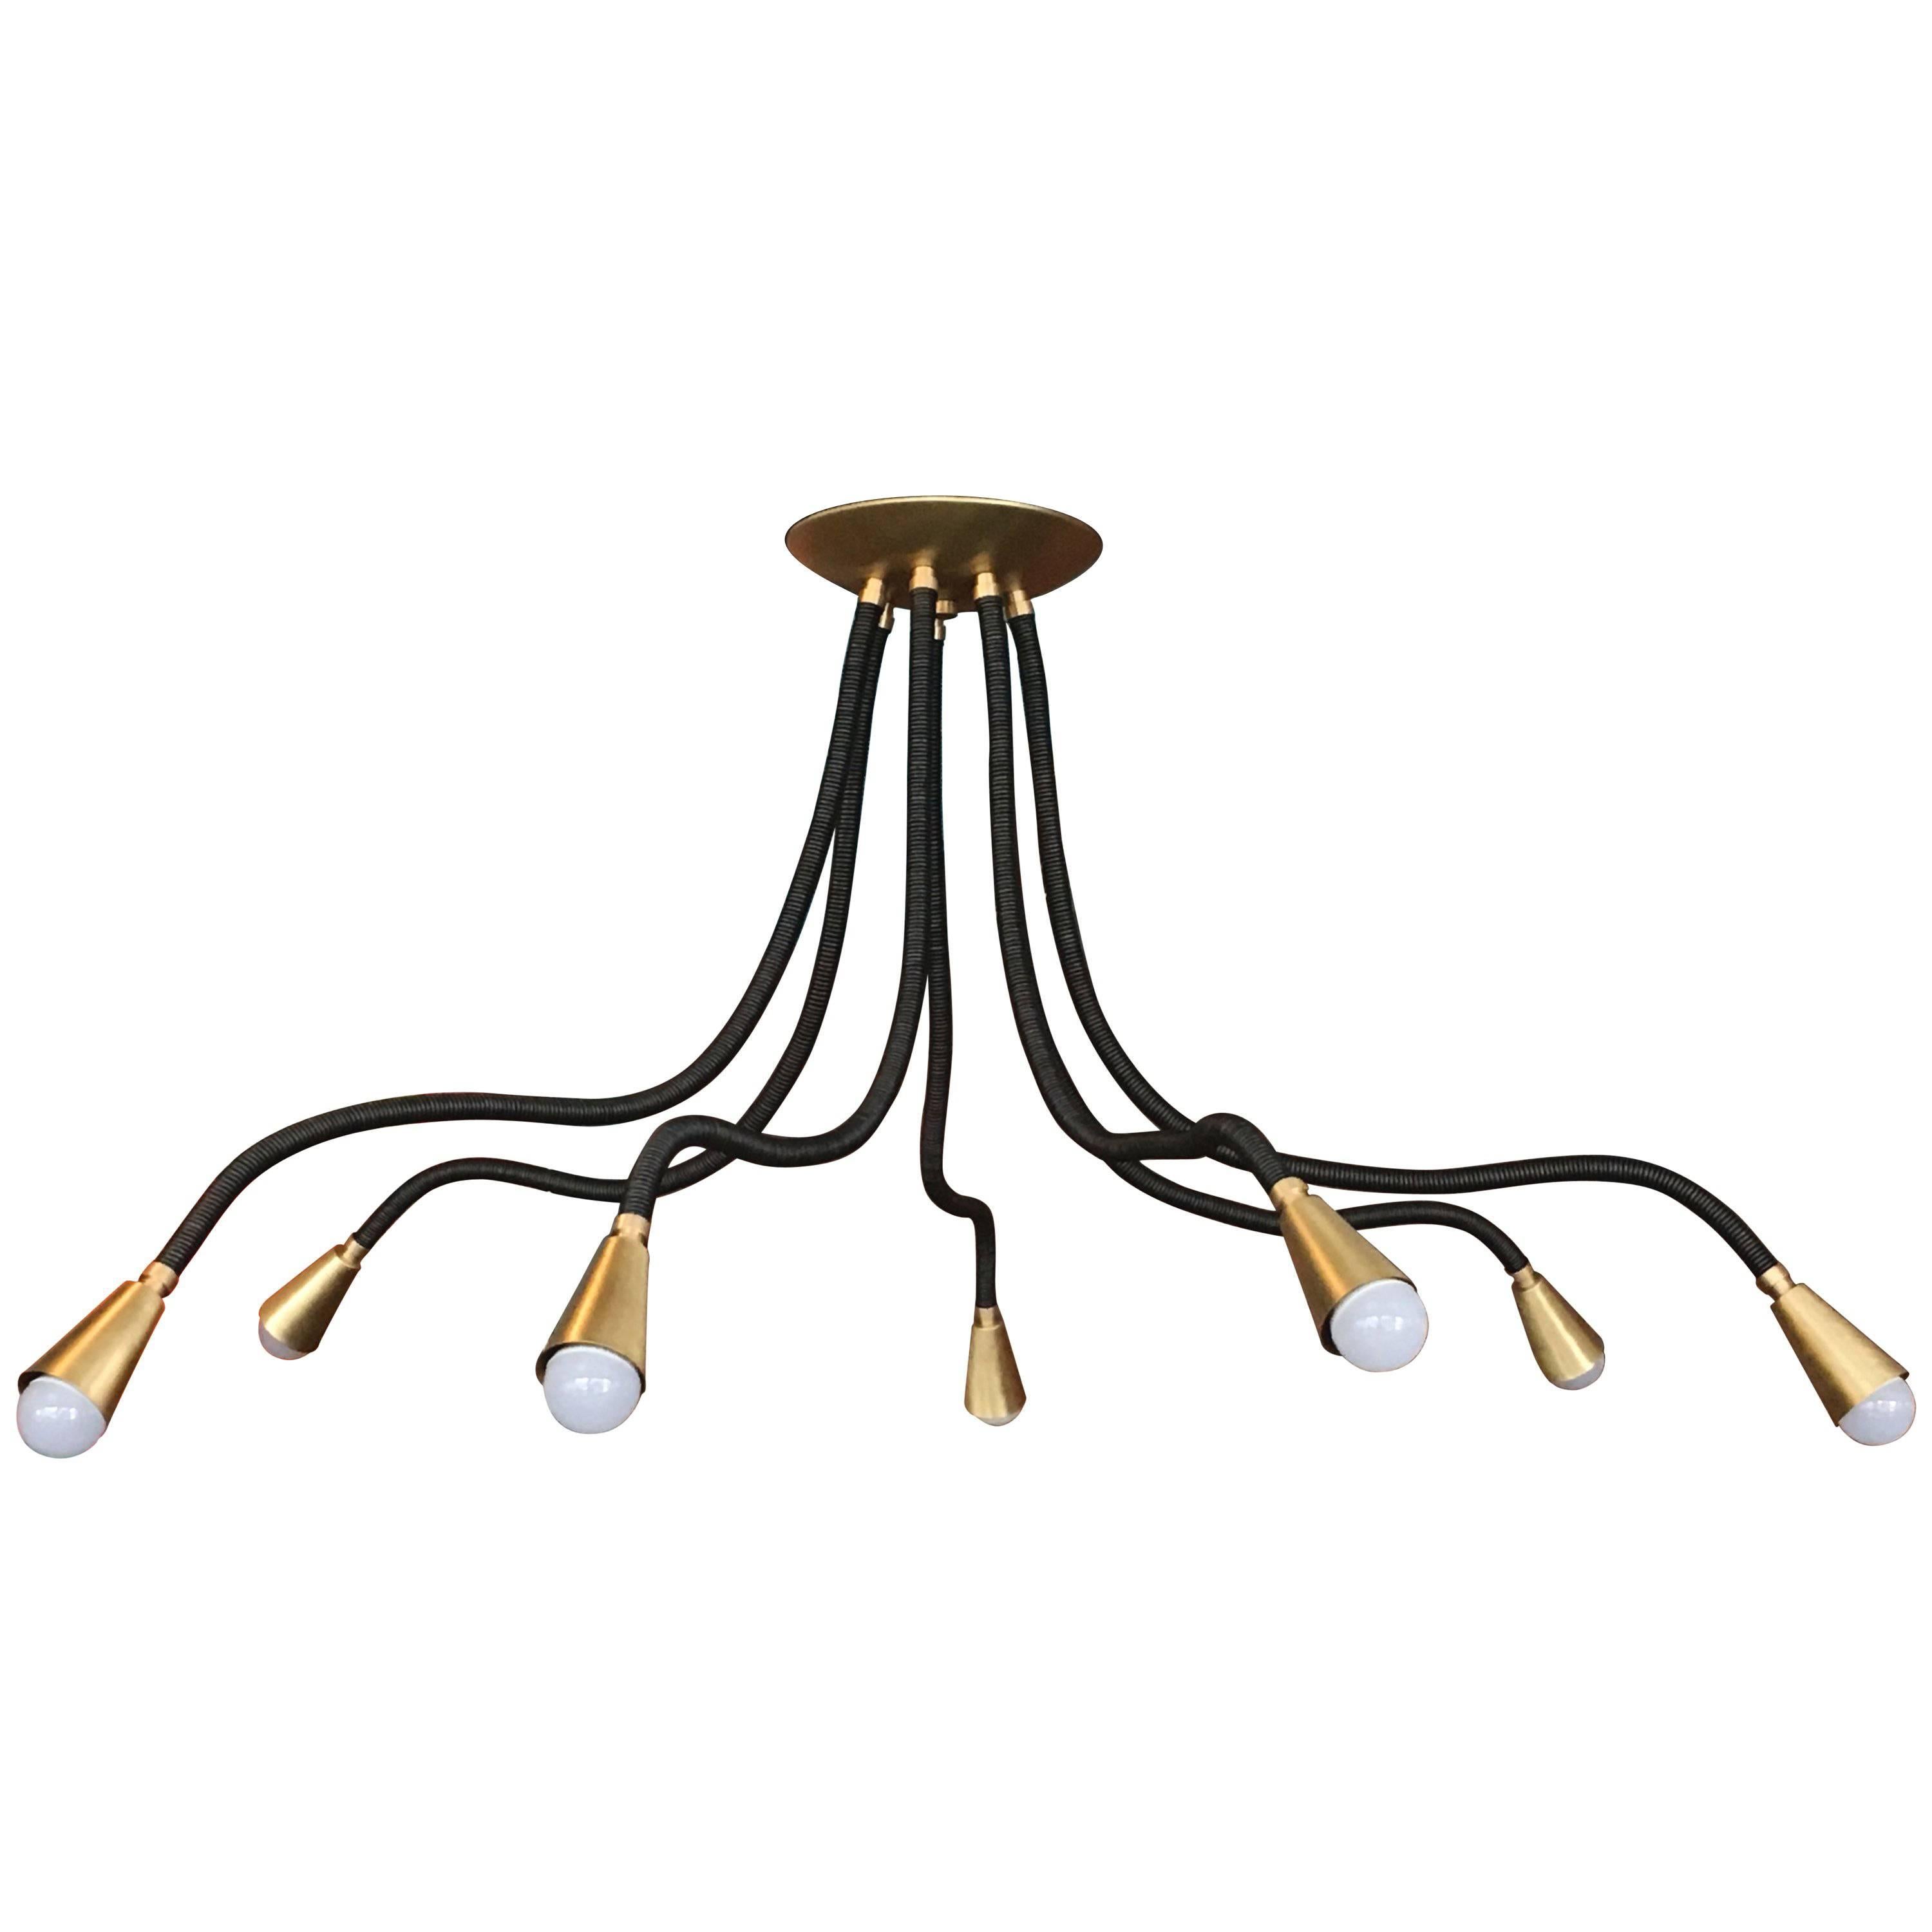 Leather and Brass Meander Chandelier with Flexible Arms